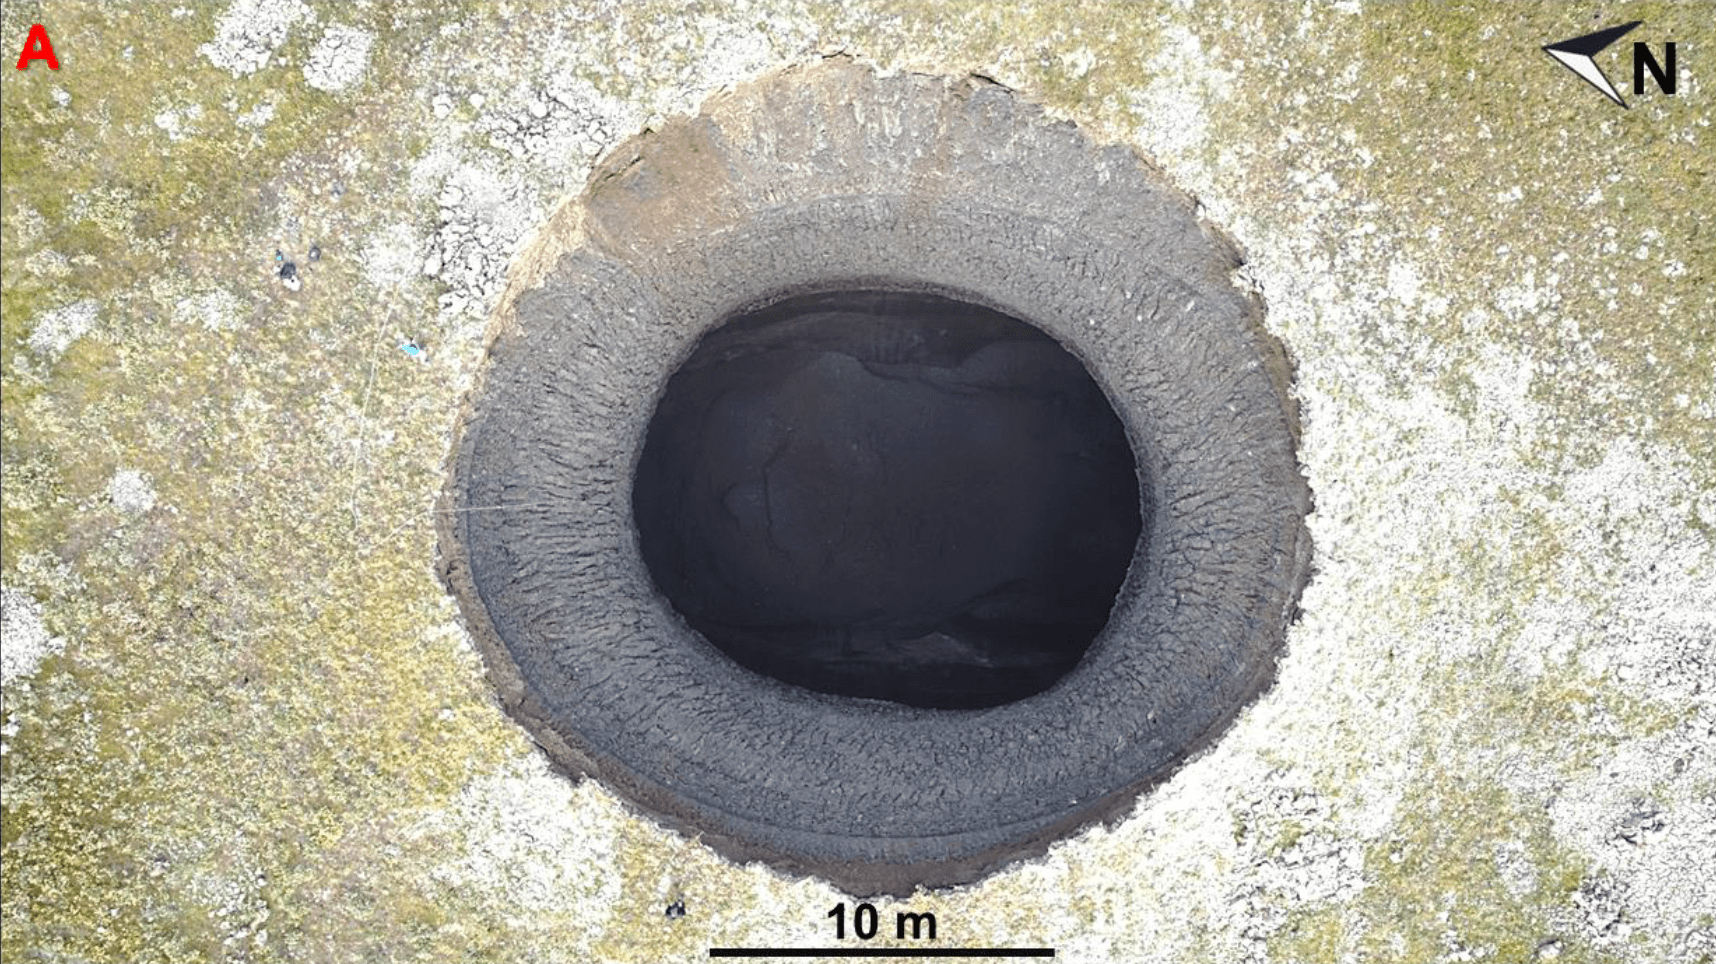 A view of the crater from directly above, as captured by the aerial drone.  (Image: V. Bogoyavlensky et al., 2021/Geosciences)